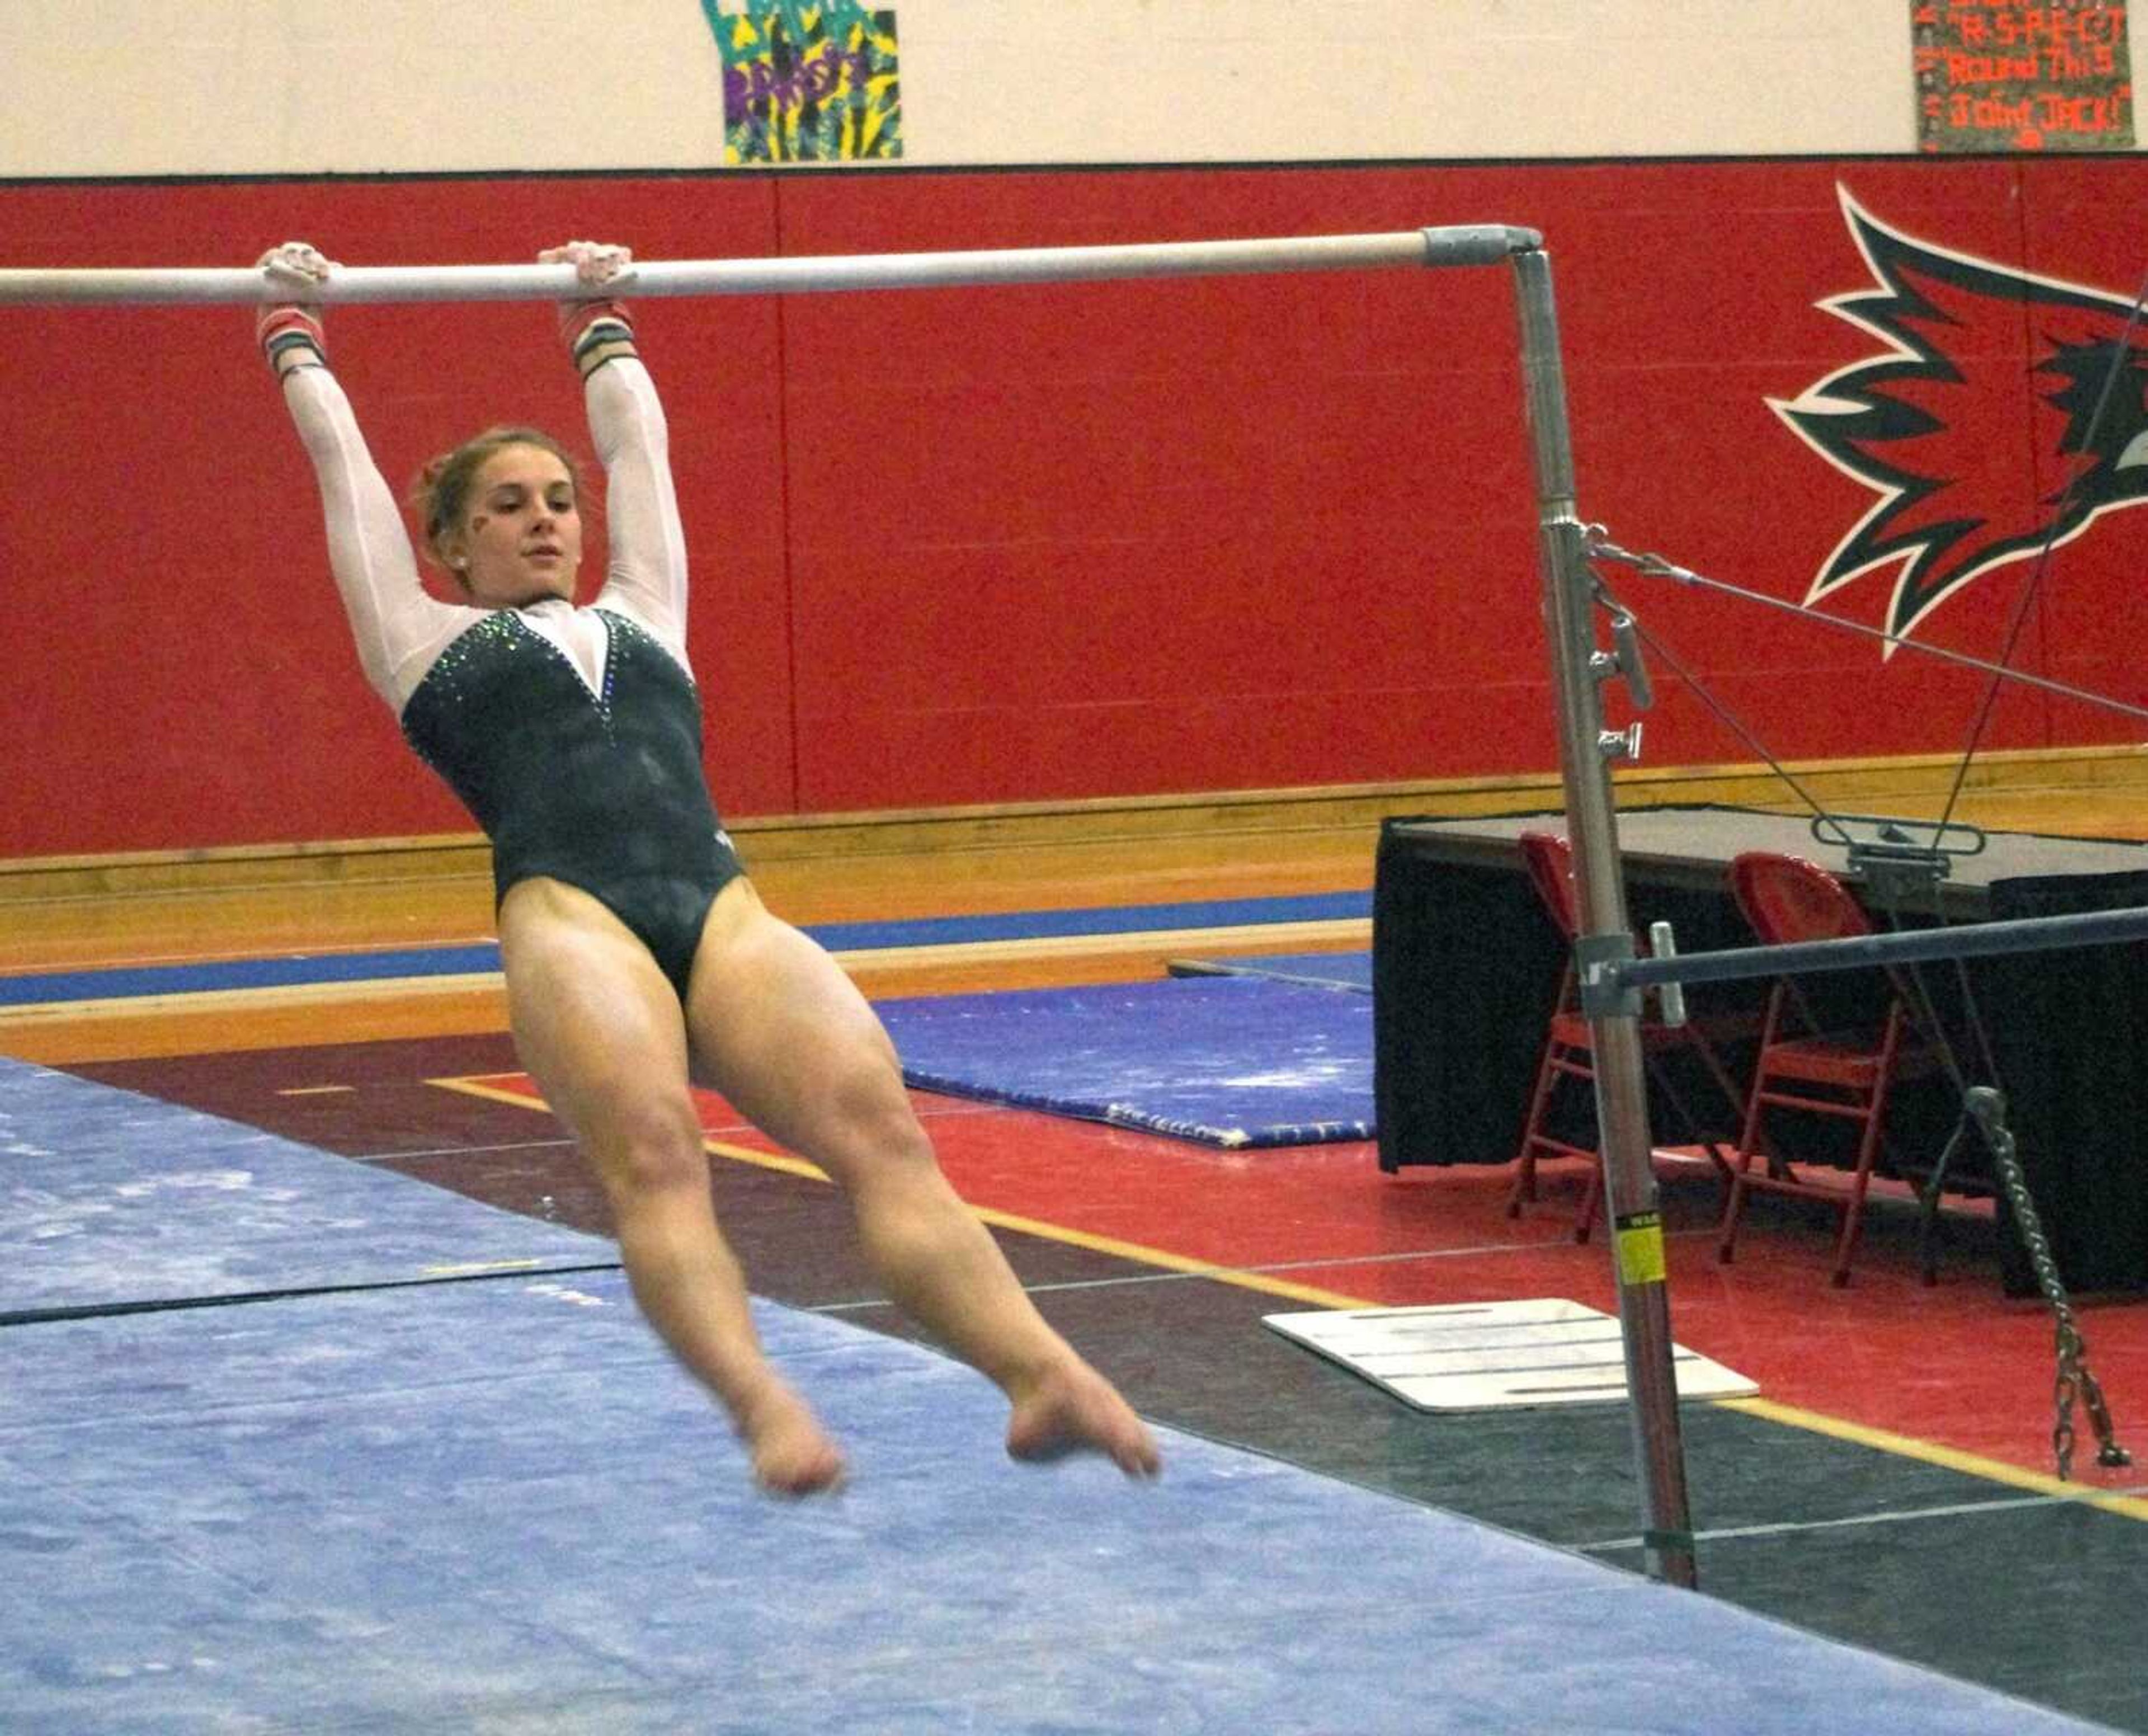 Taylor Westrick starts her bar routine at the gymnastics meet and greet that was held Friday at Houck Field House. Photo by Nathan Hamilton